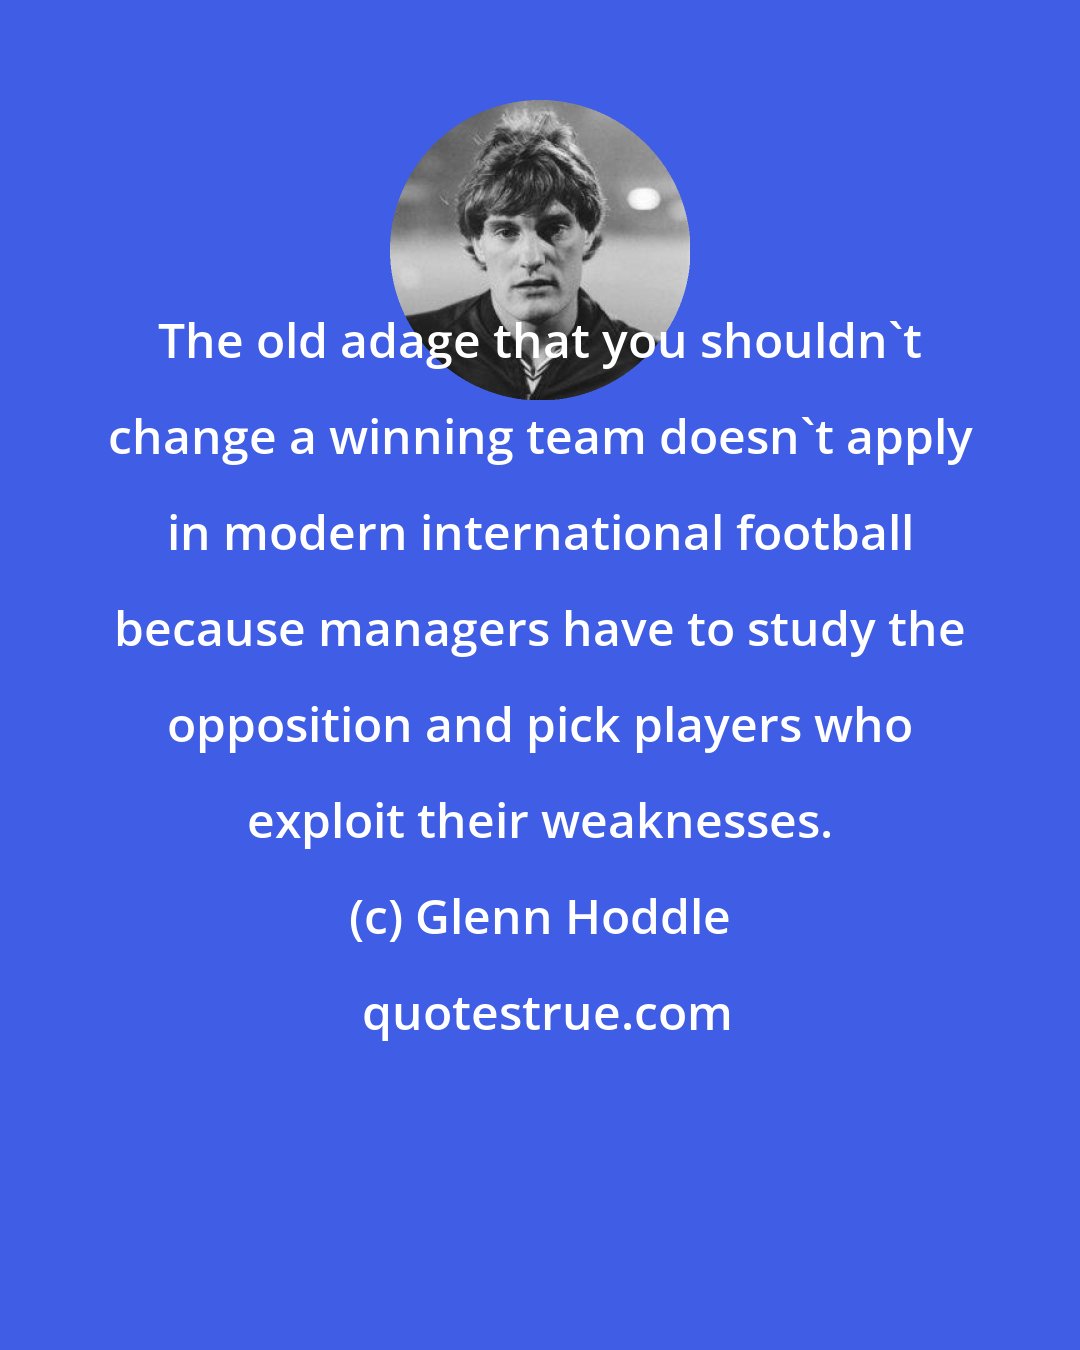 Glenn Hoddle: The old adage that you shouldn't change a winning team doesn't apply in modern international football because managers have to study the opposition and pick players who exploit their weaknesses.